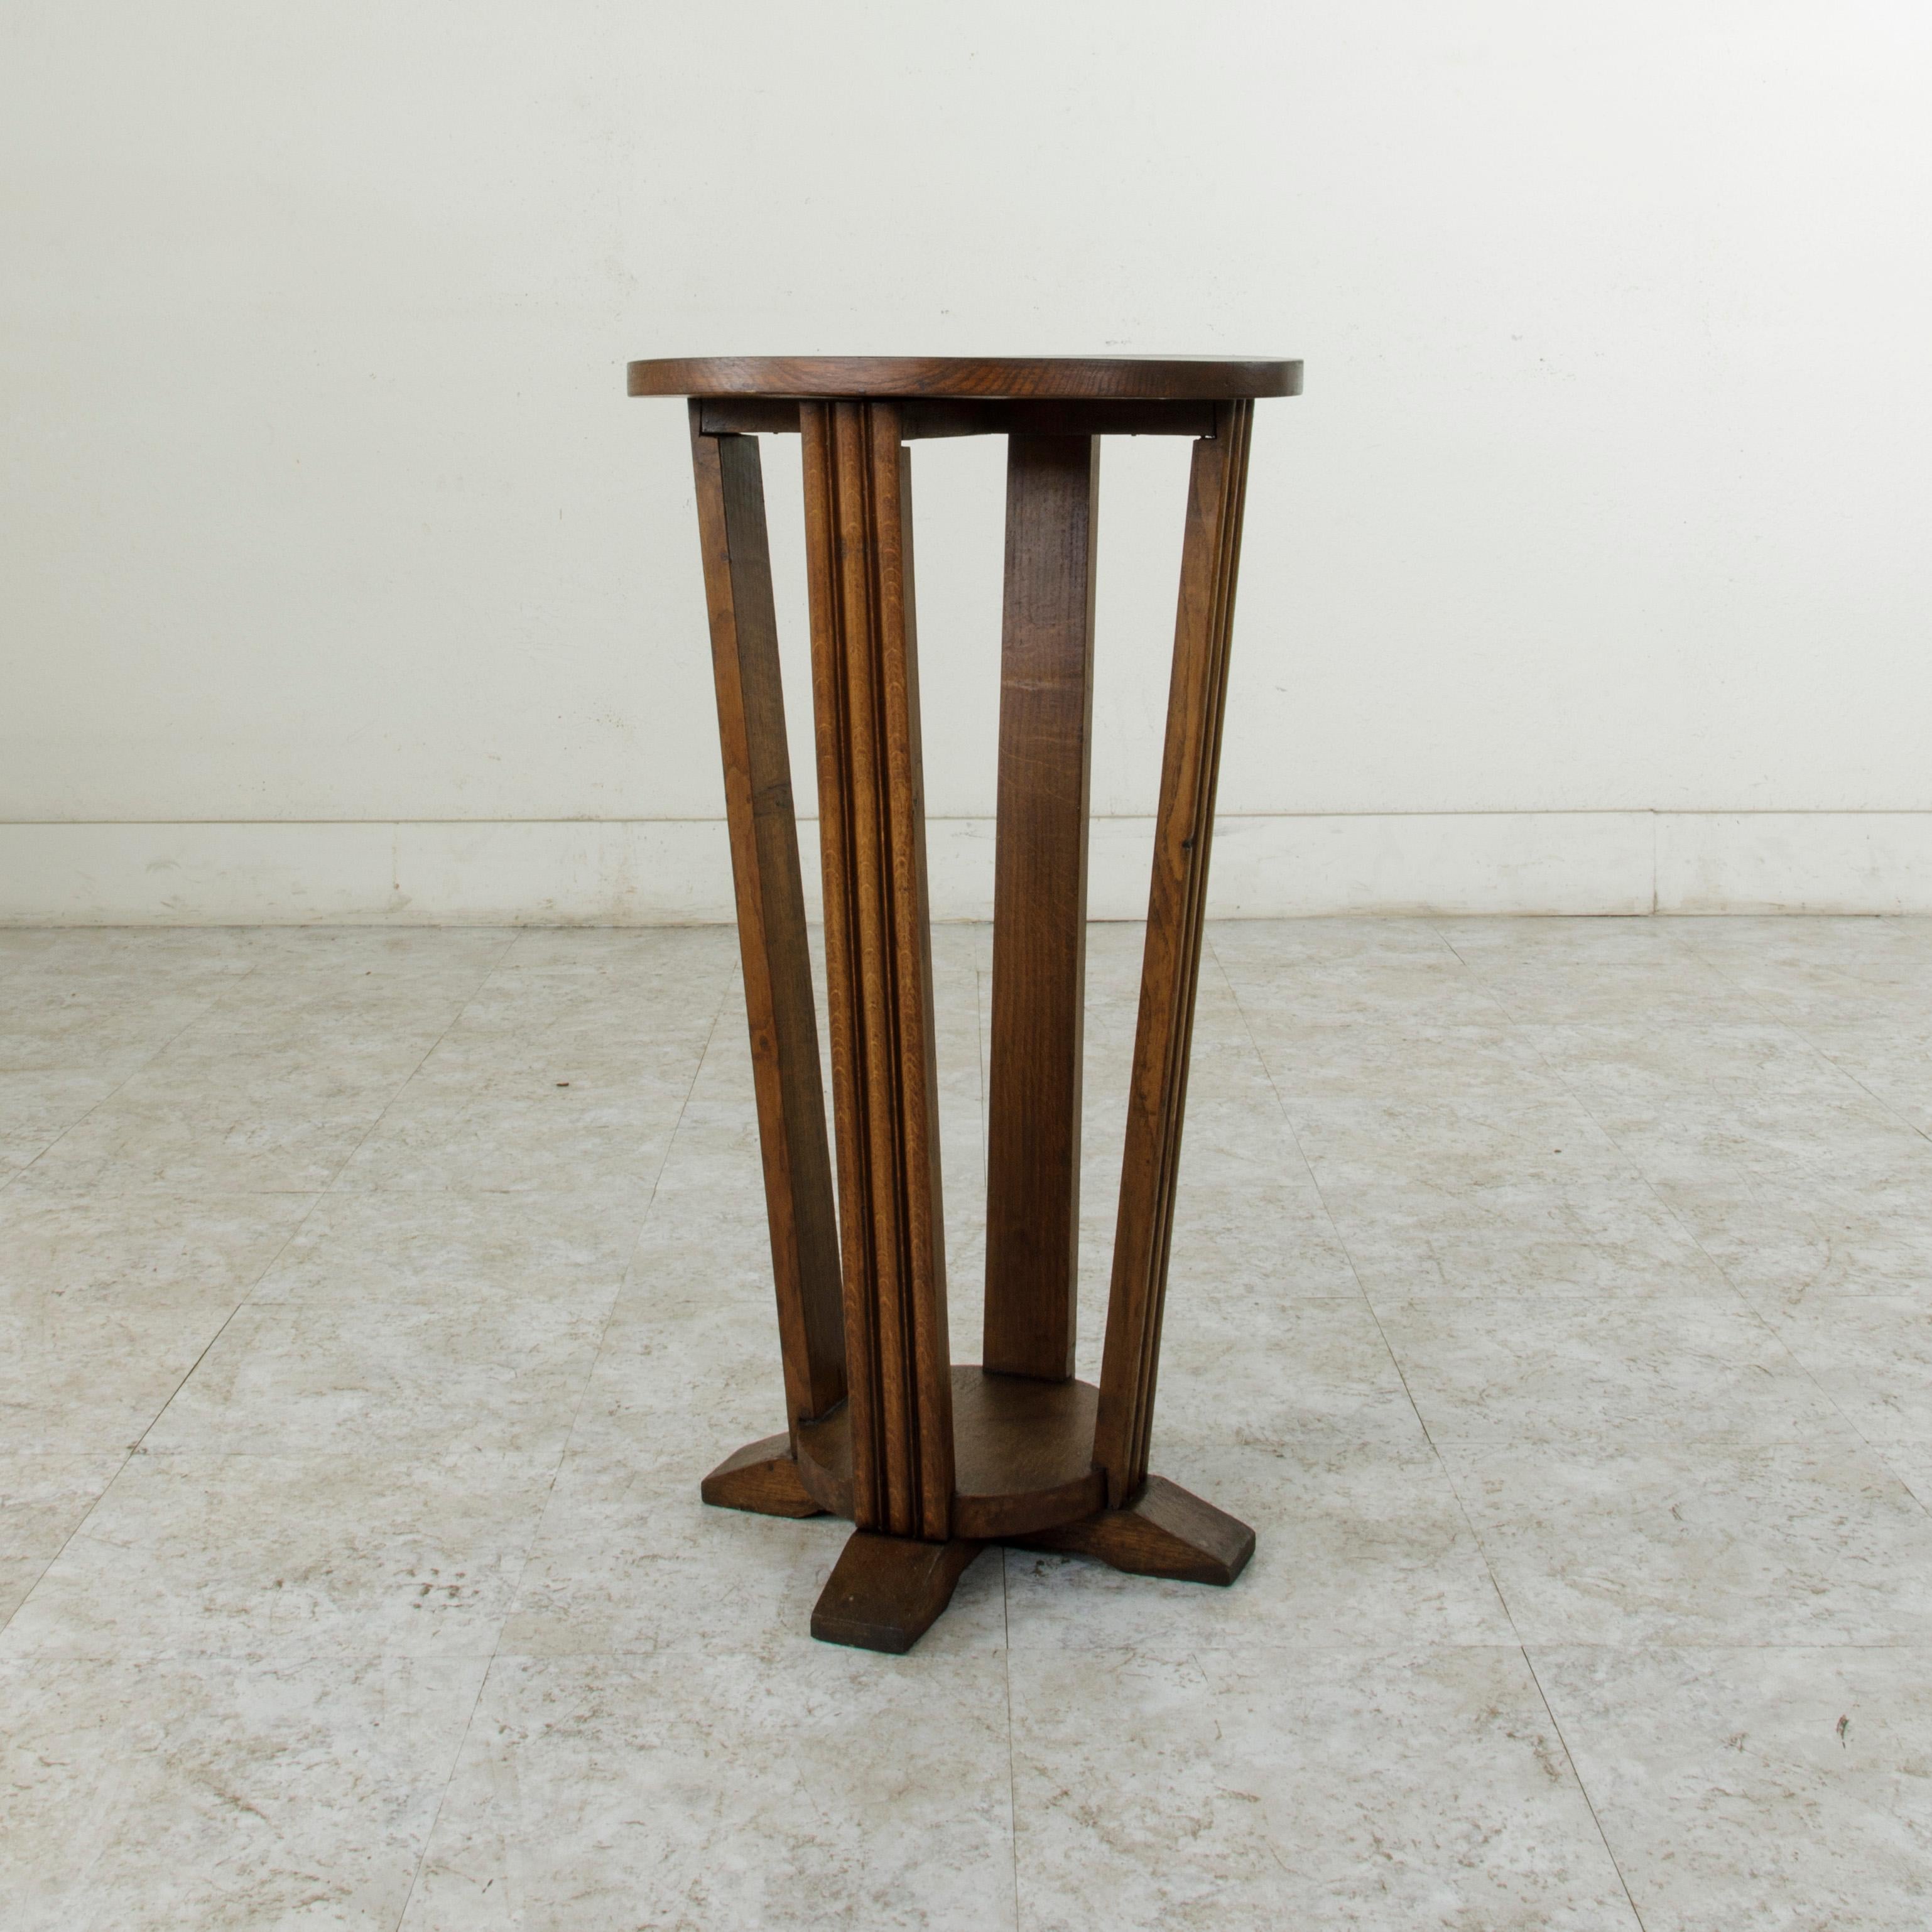 Early 20th Century French Art Deco Period Oak Pedestal, Side Table, Fern Stand (Art déco)